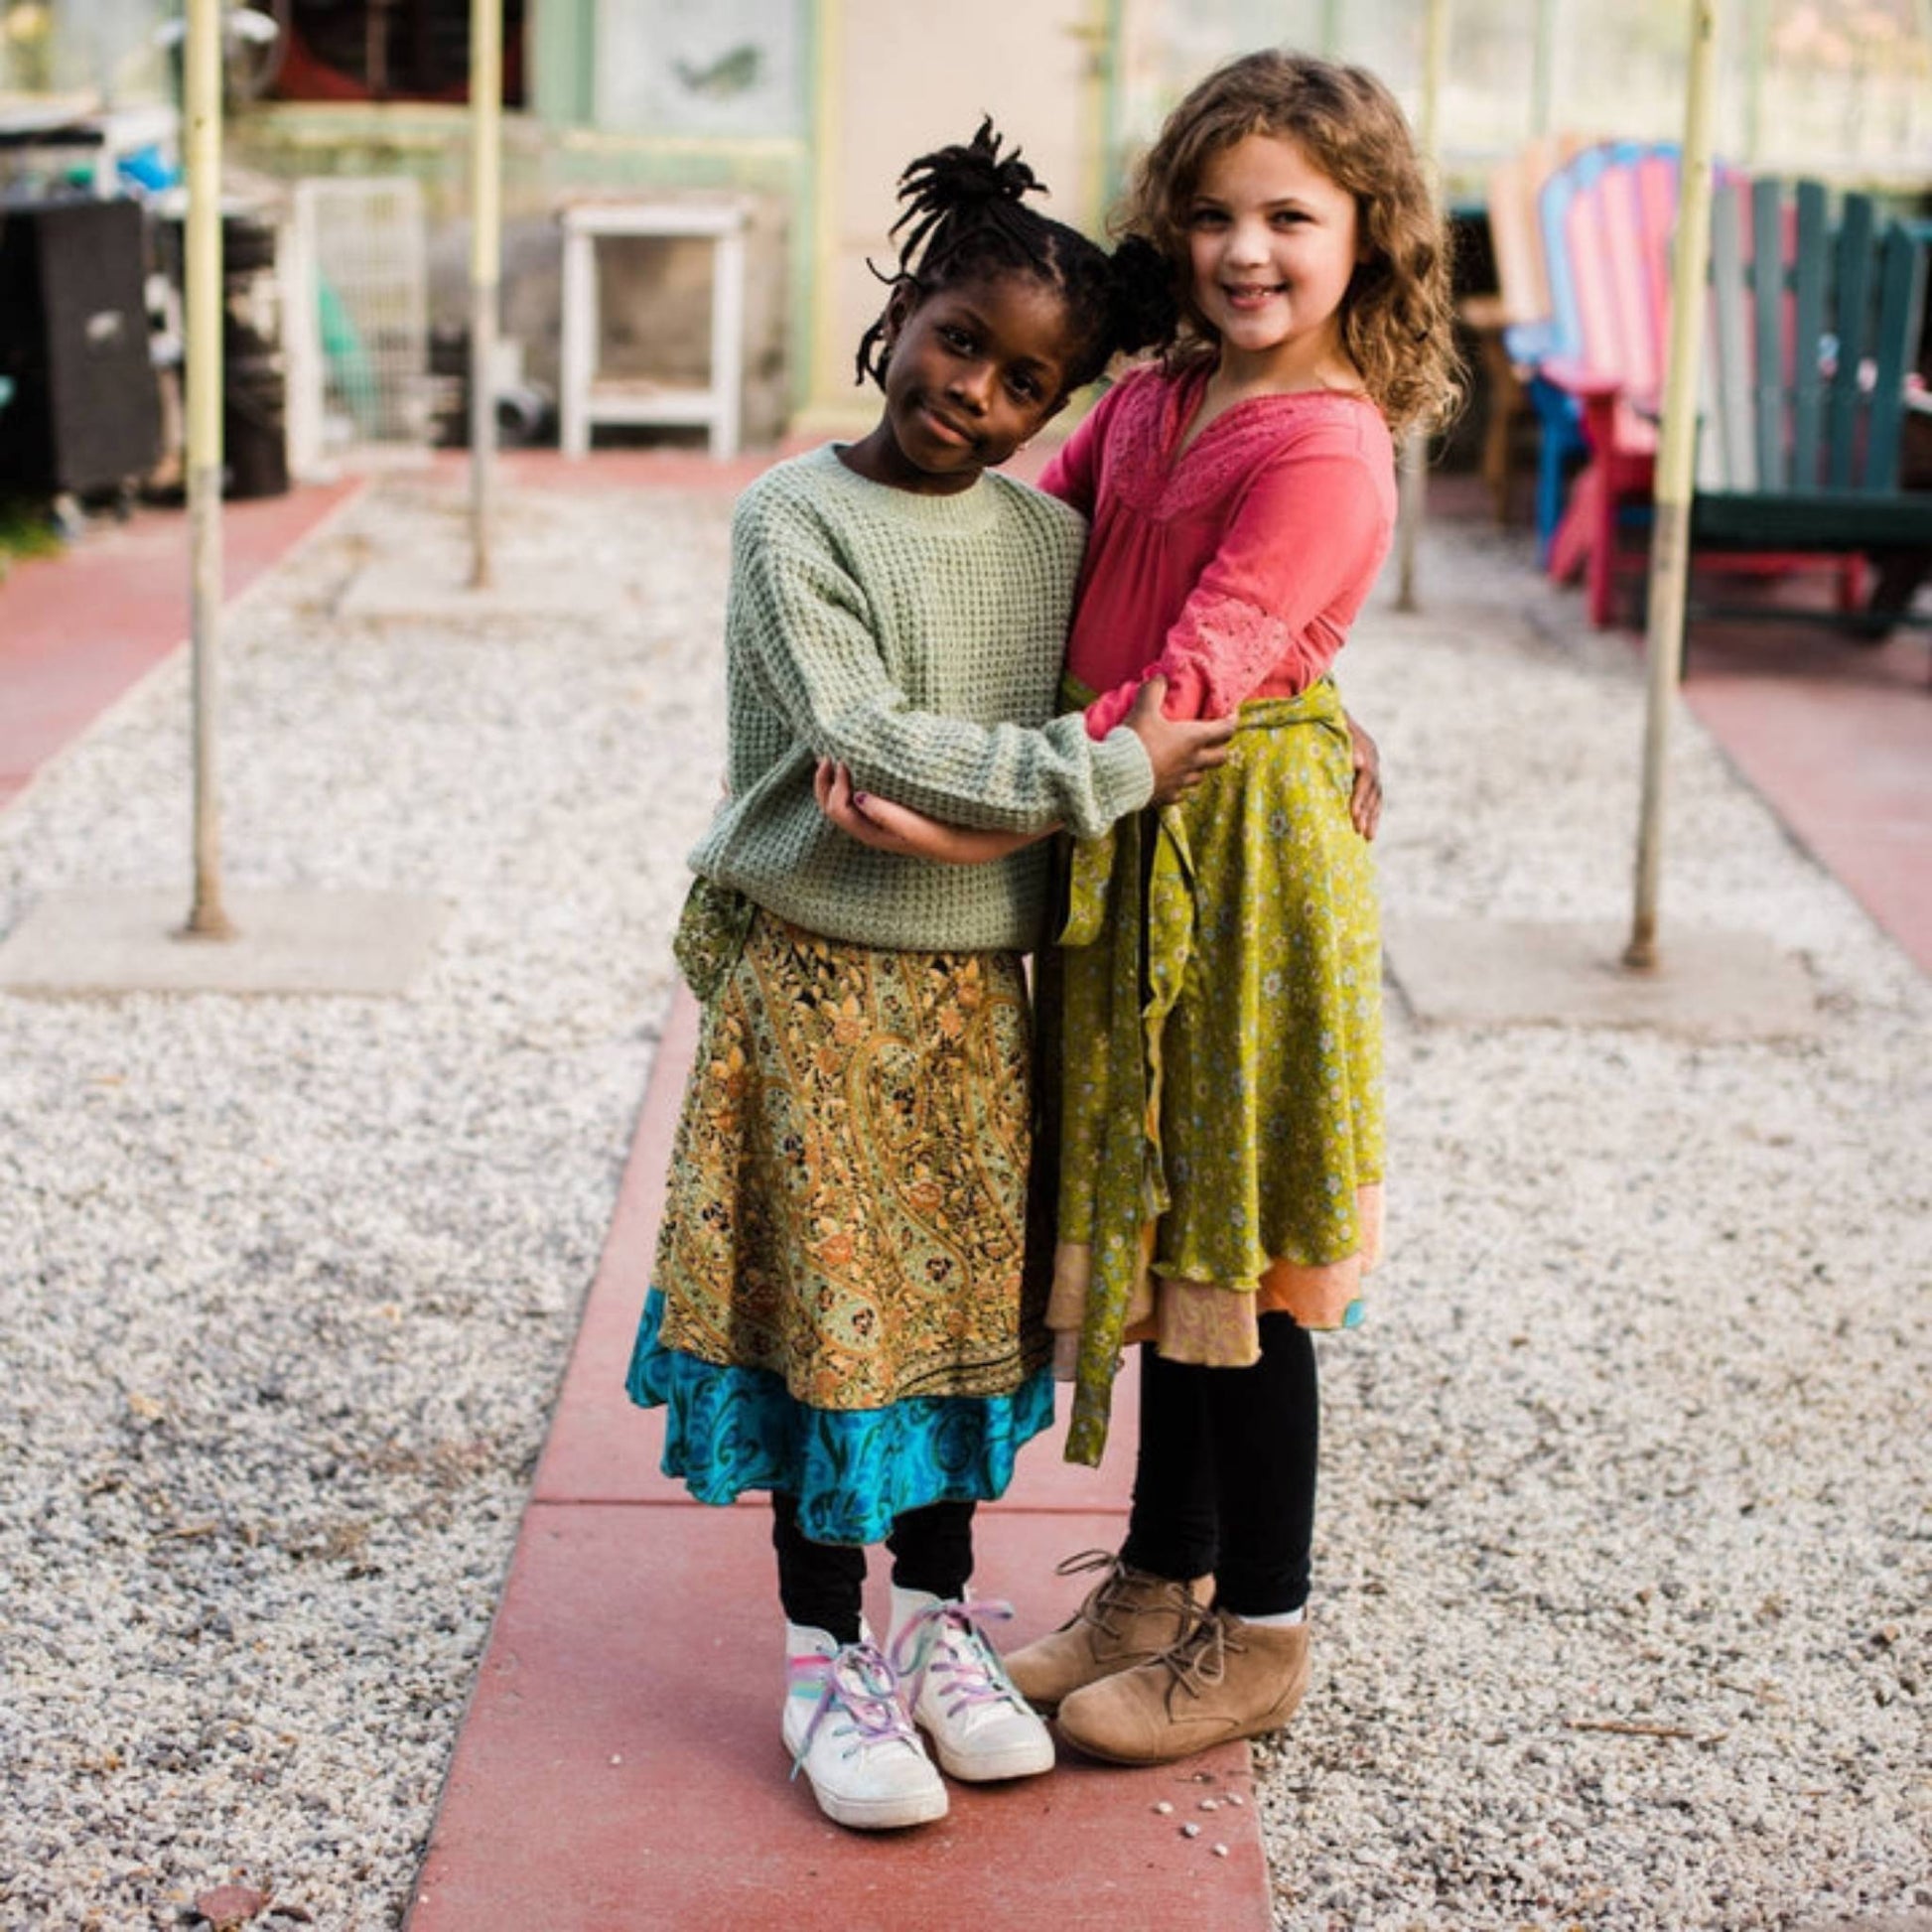 Two kid models wearing junior sari wrap skirts while standing in a greenhouse.